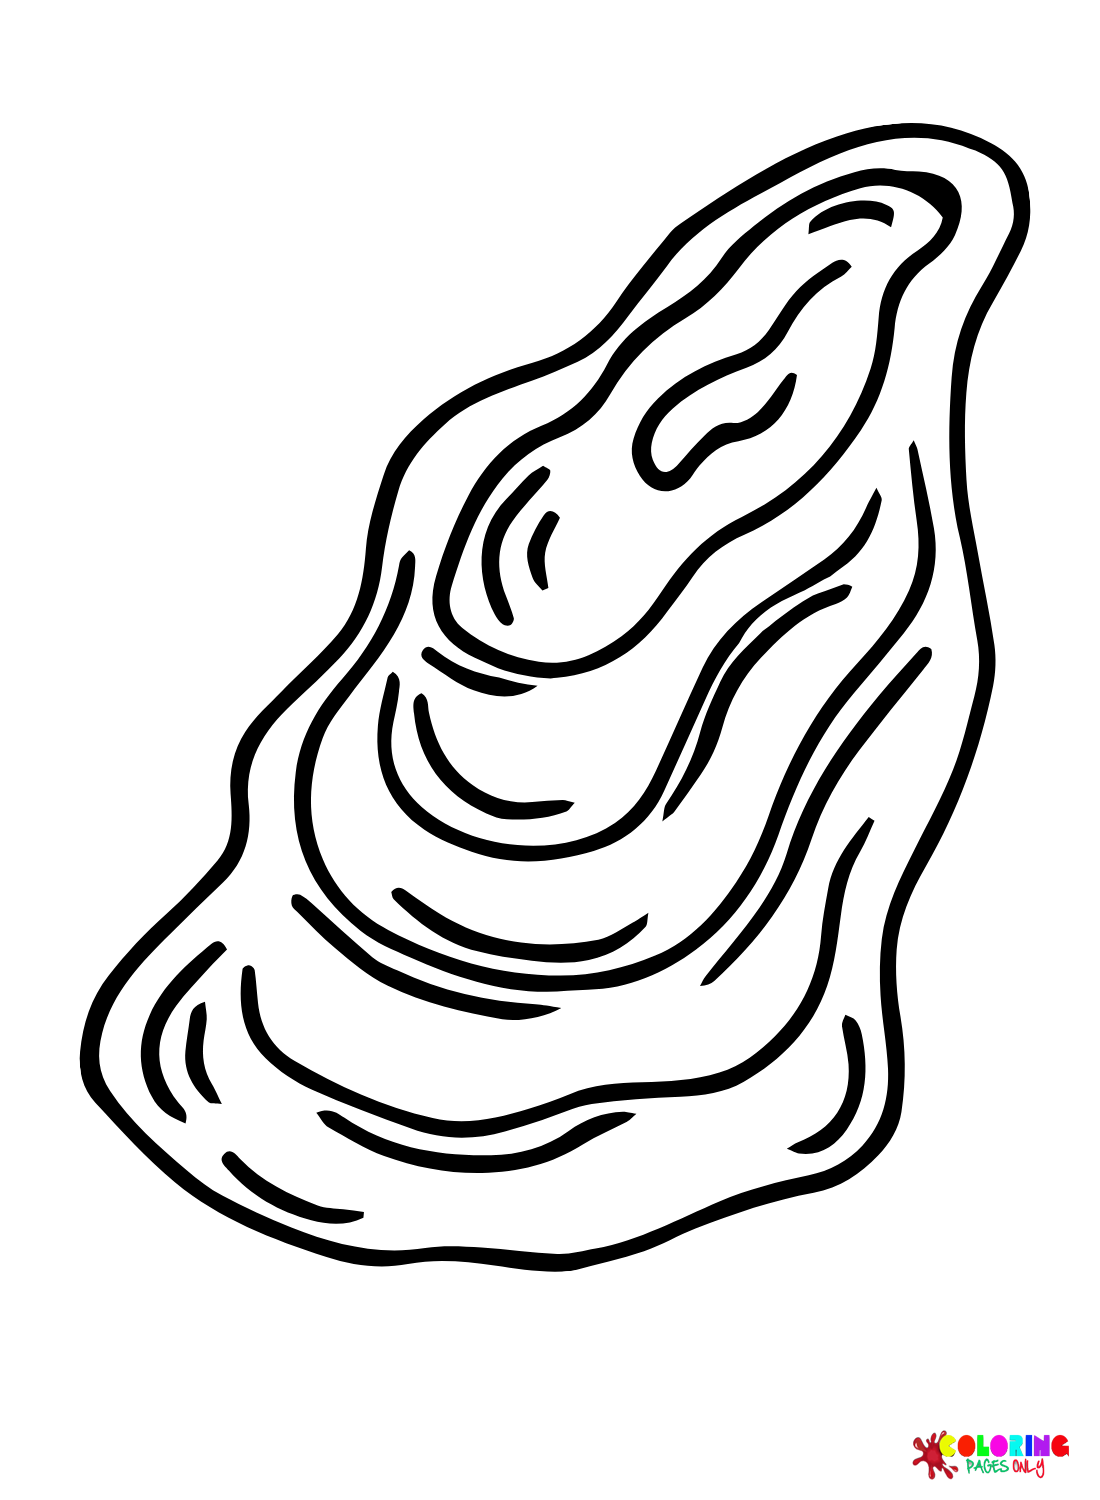 Printable Mussels Coloring Page